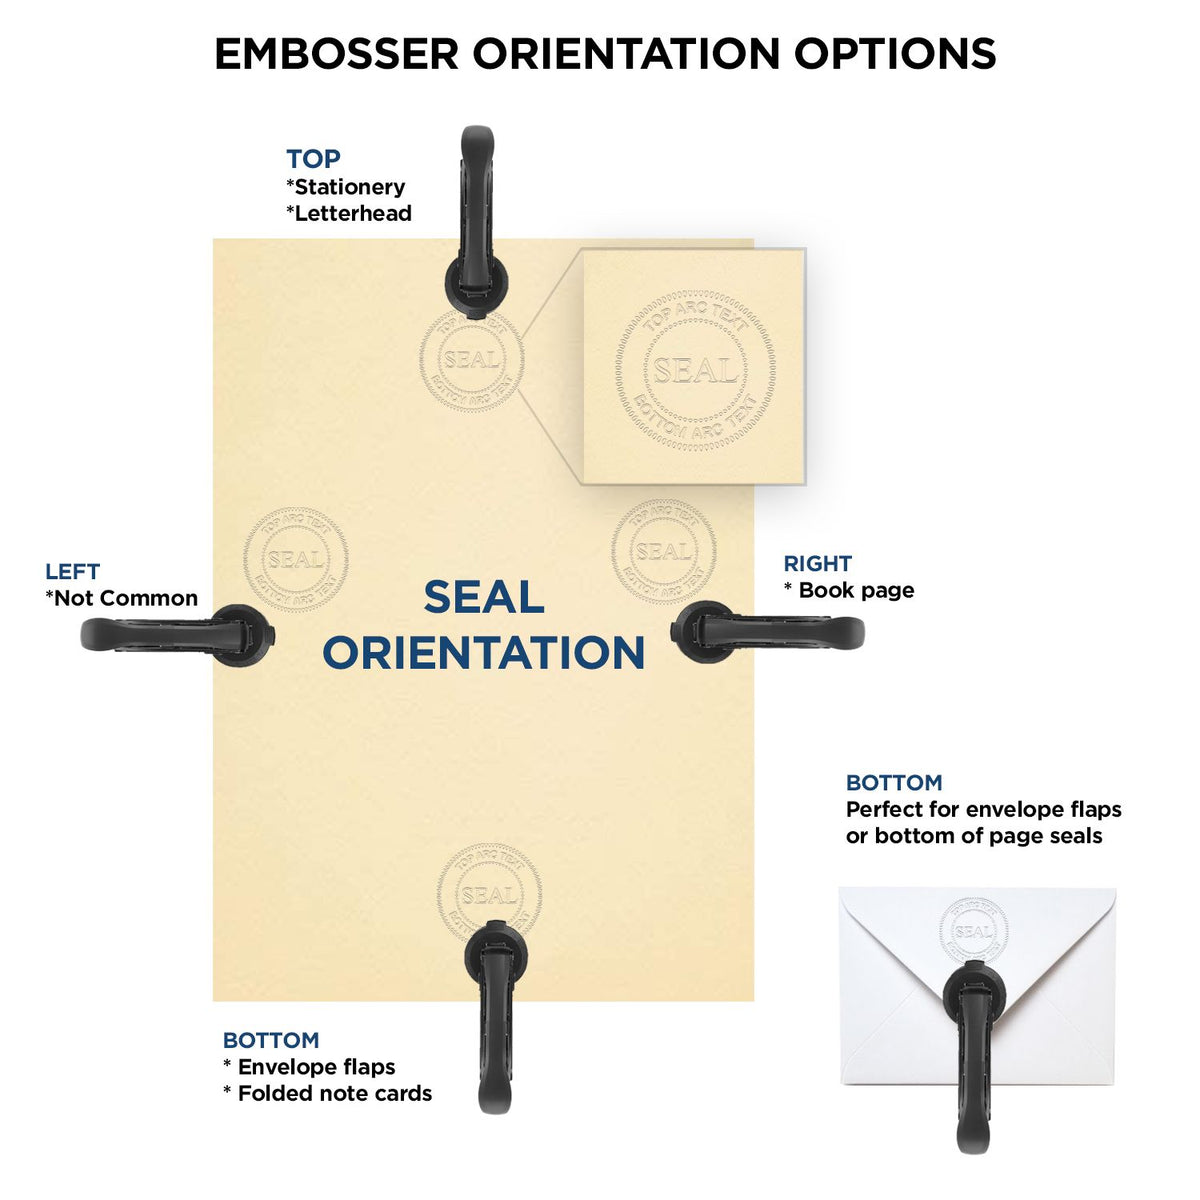 An infographic for the Handheld Indiana Professional Geologist Embosser showing embosser orientation, this is showing examples of a top, bottom, right and left insert.